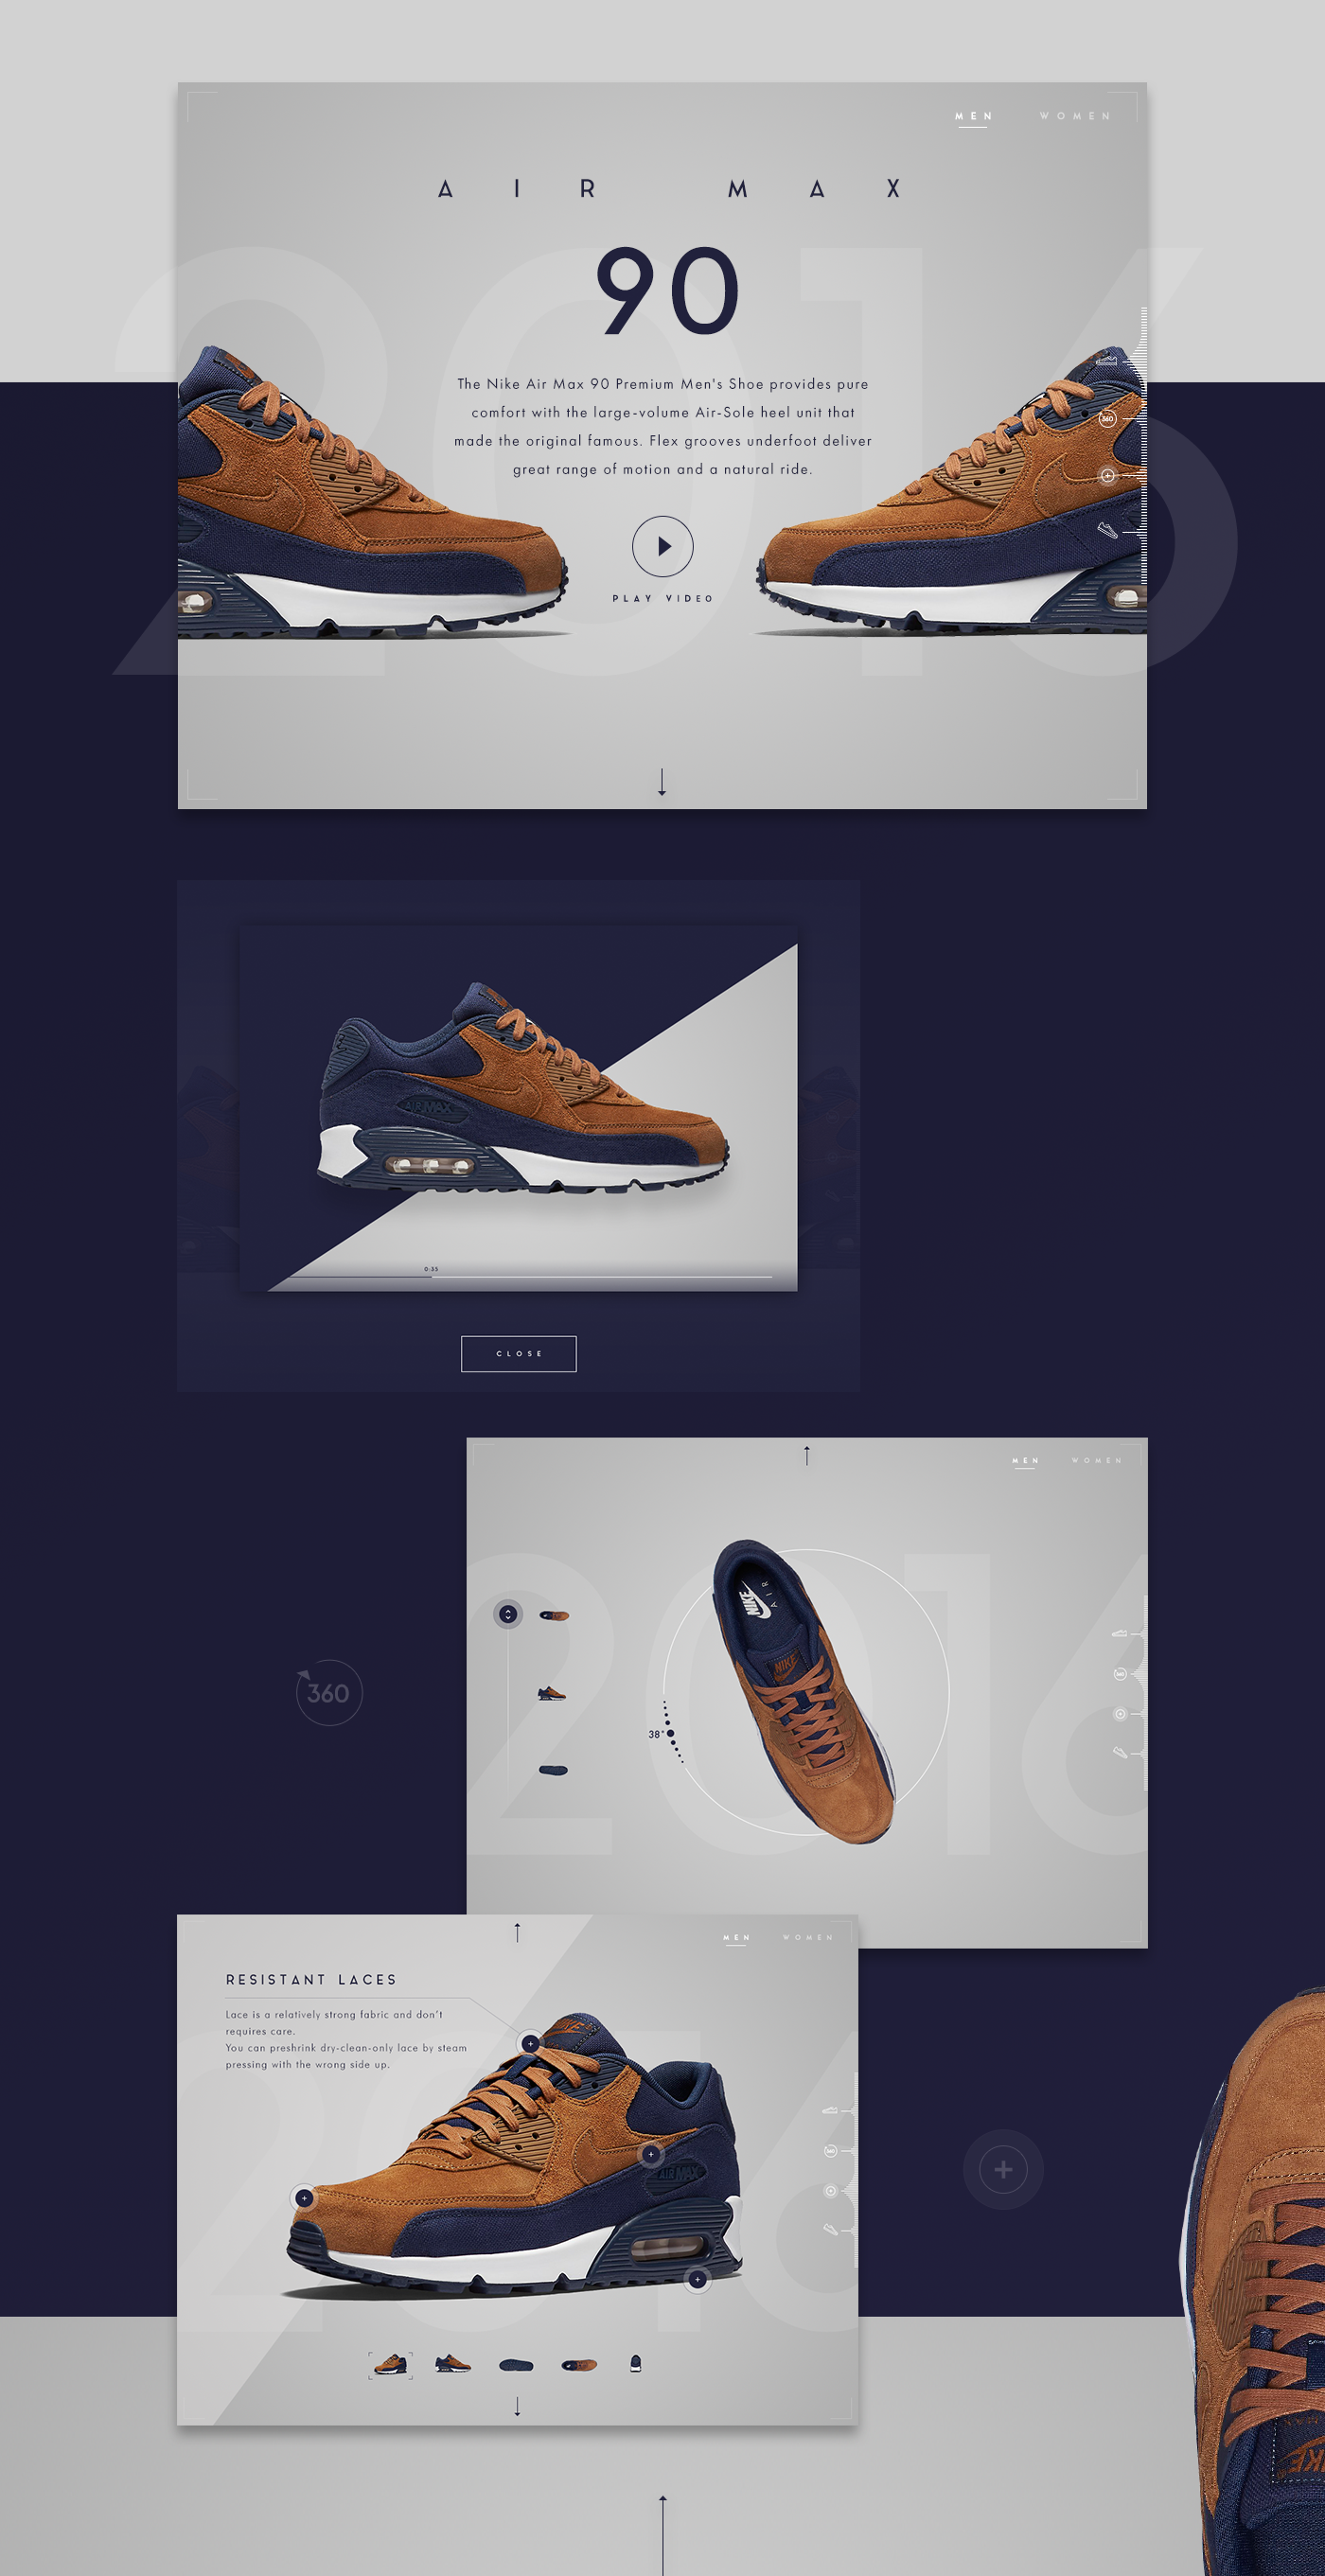 Nike air max tablet store shoes 3D map card sneakers interaction